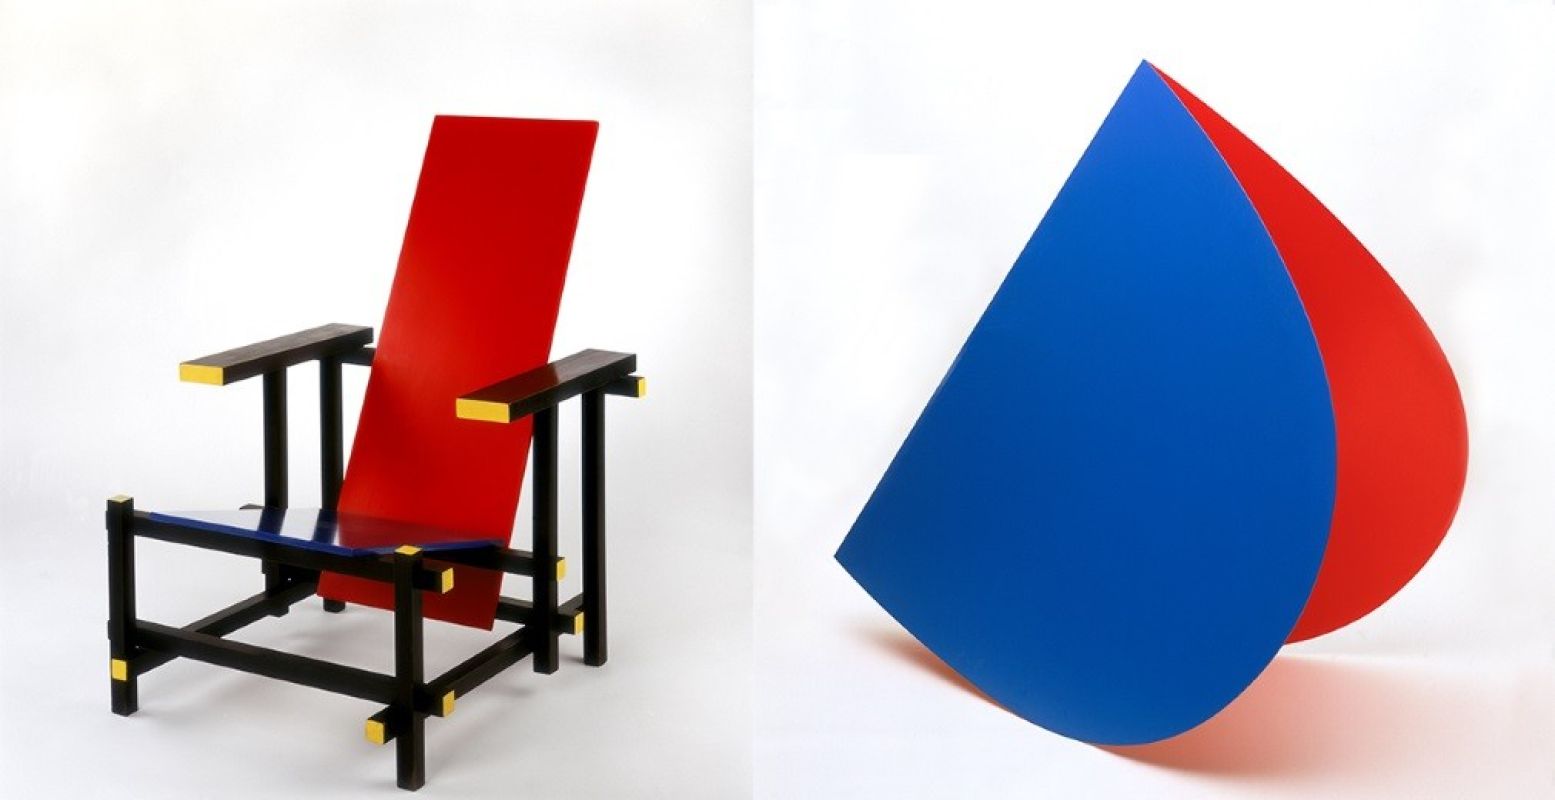 Gerrit Rietveld, Red and Blue Chair, 19191950, coll. Stedelijk Museum Amsterdam en Elsworth Kelly, Blue and Red Rocker, 1963, coll. Stedelijk Museum Amsterdam. Foto: Stedelijk Museum Amsterdam.